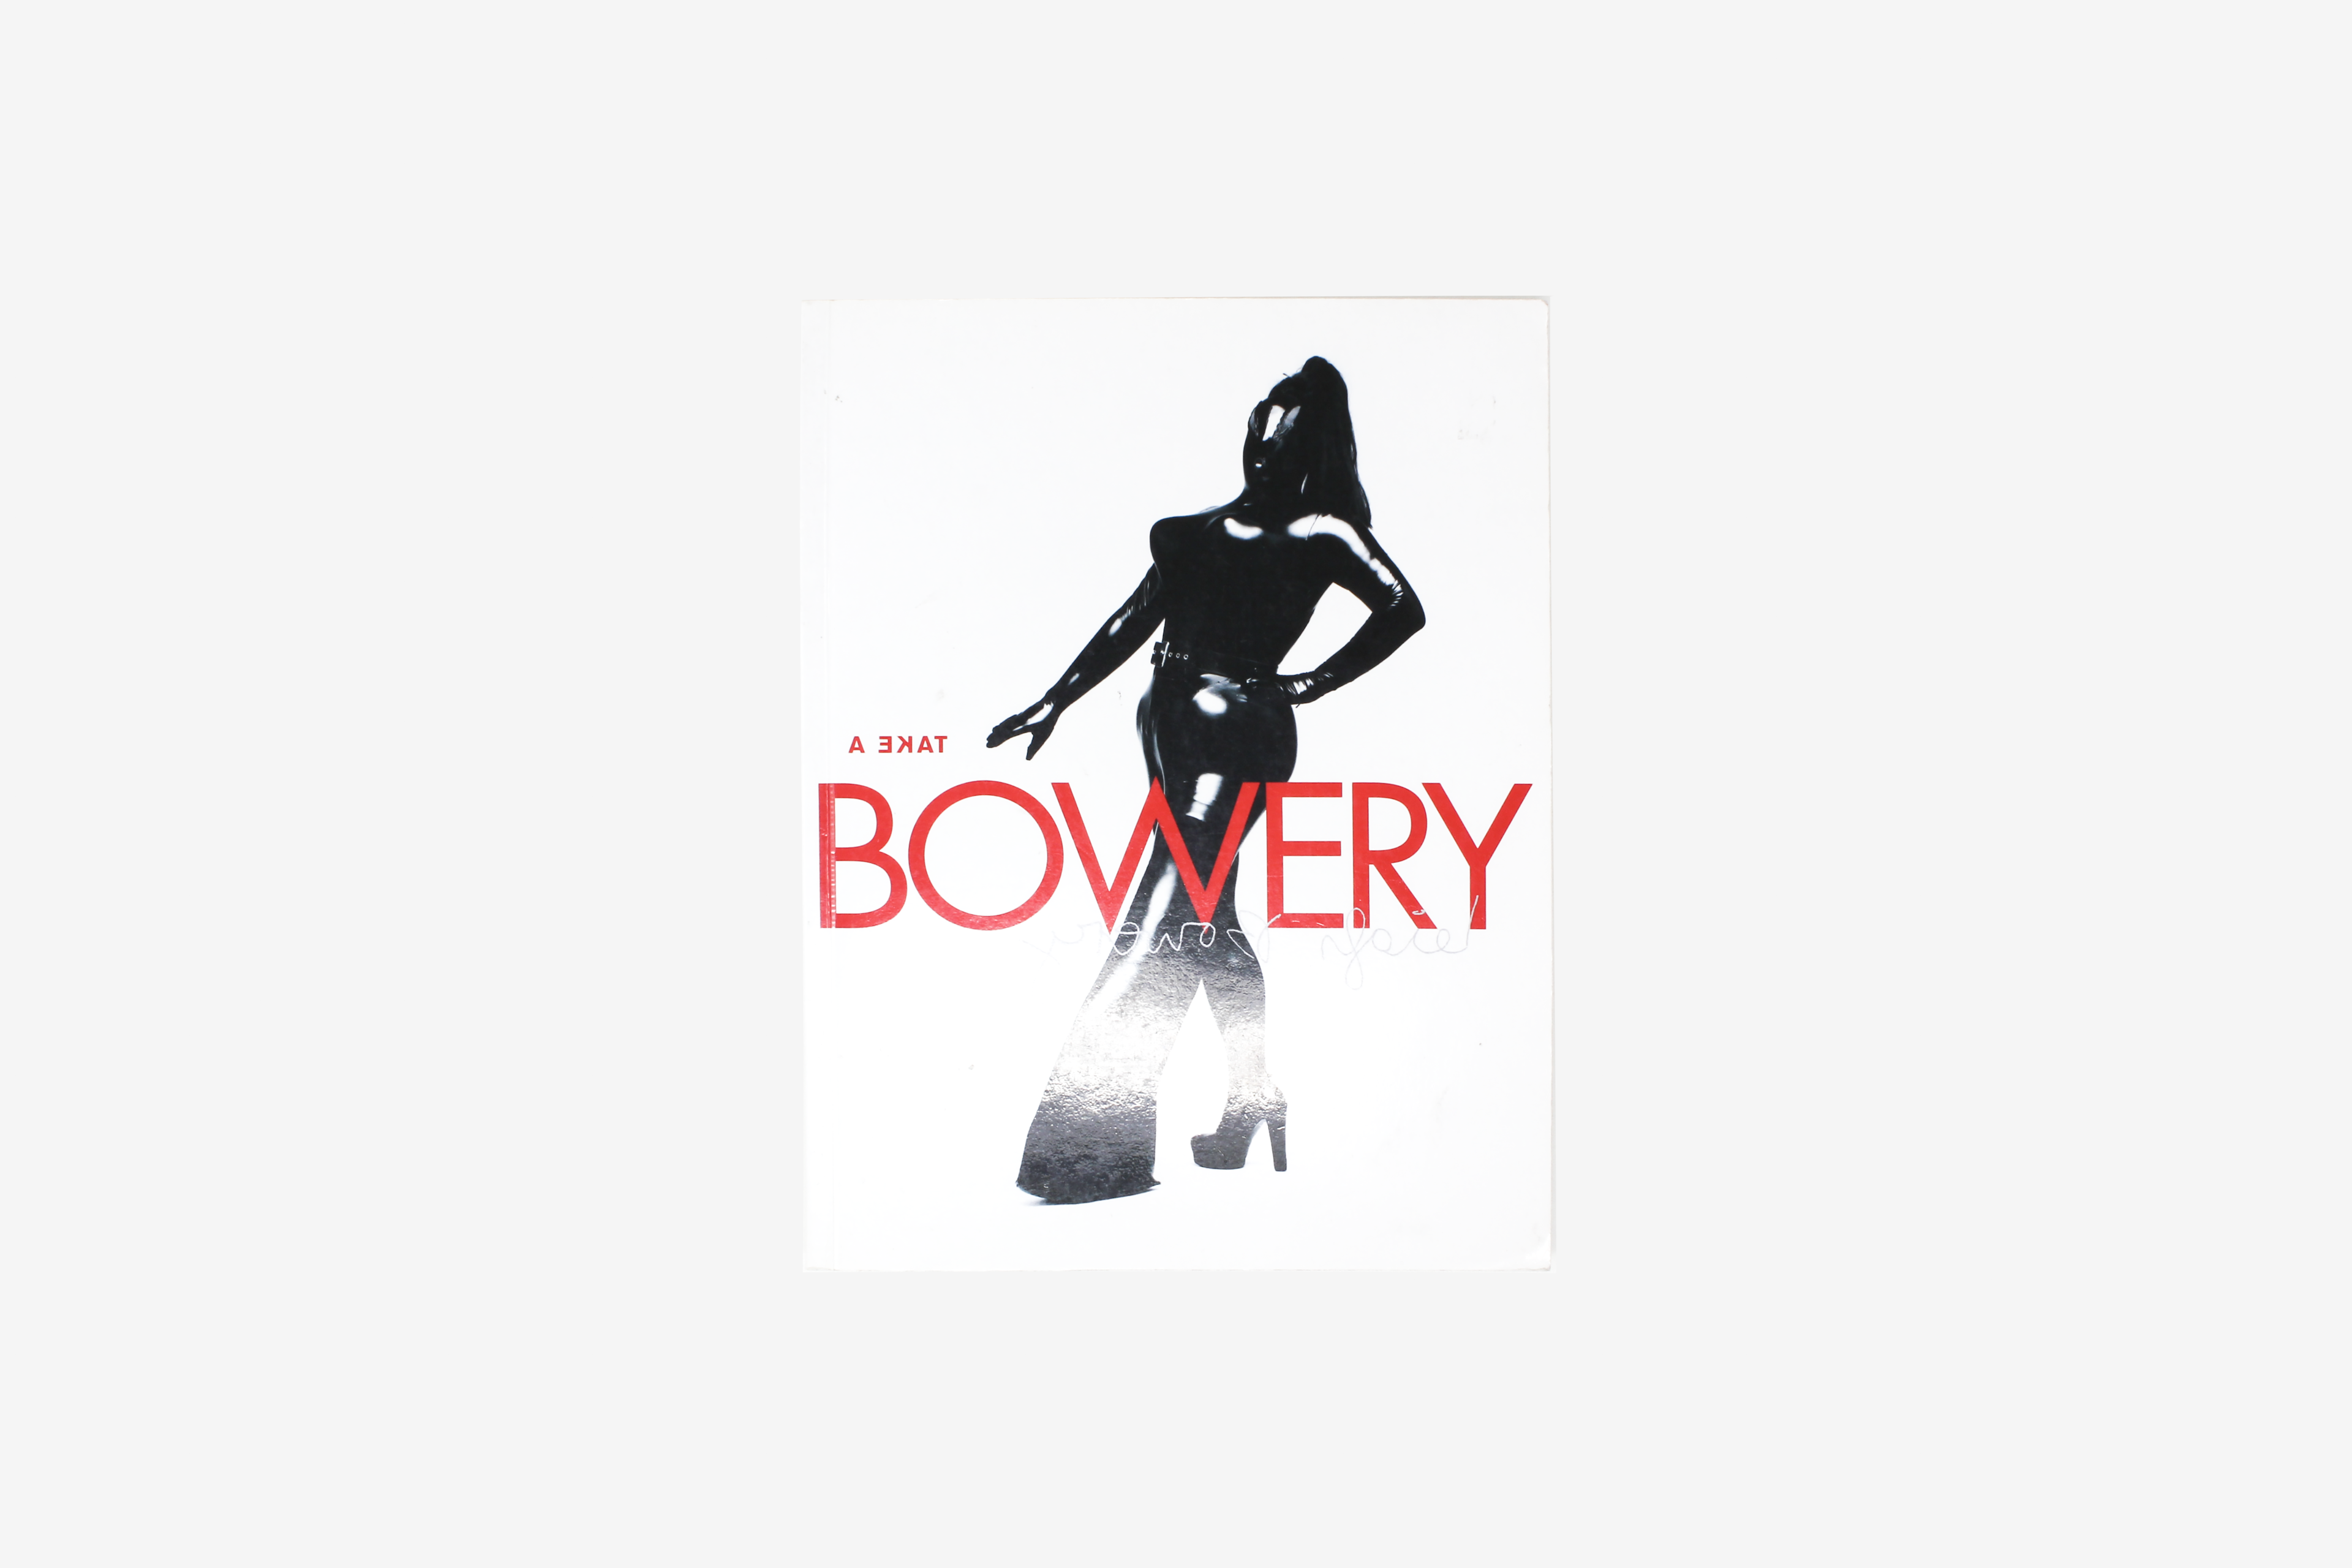 Take a Bowery: The Art and (larger than) Life of Leigh Bowery